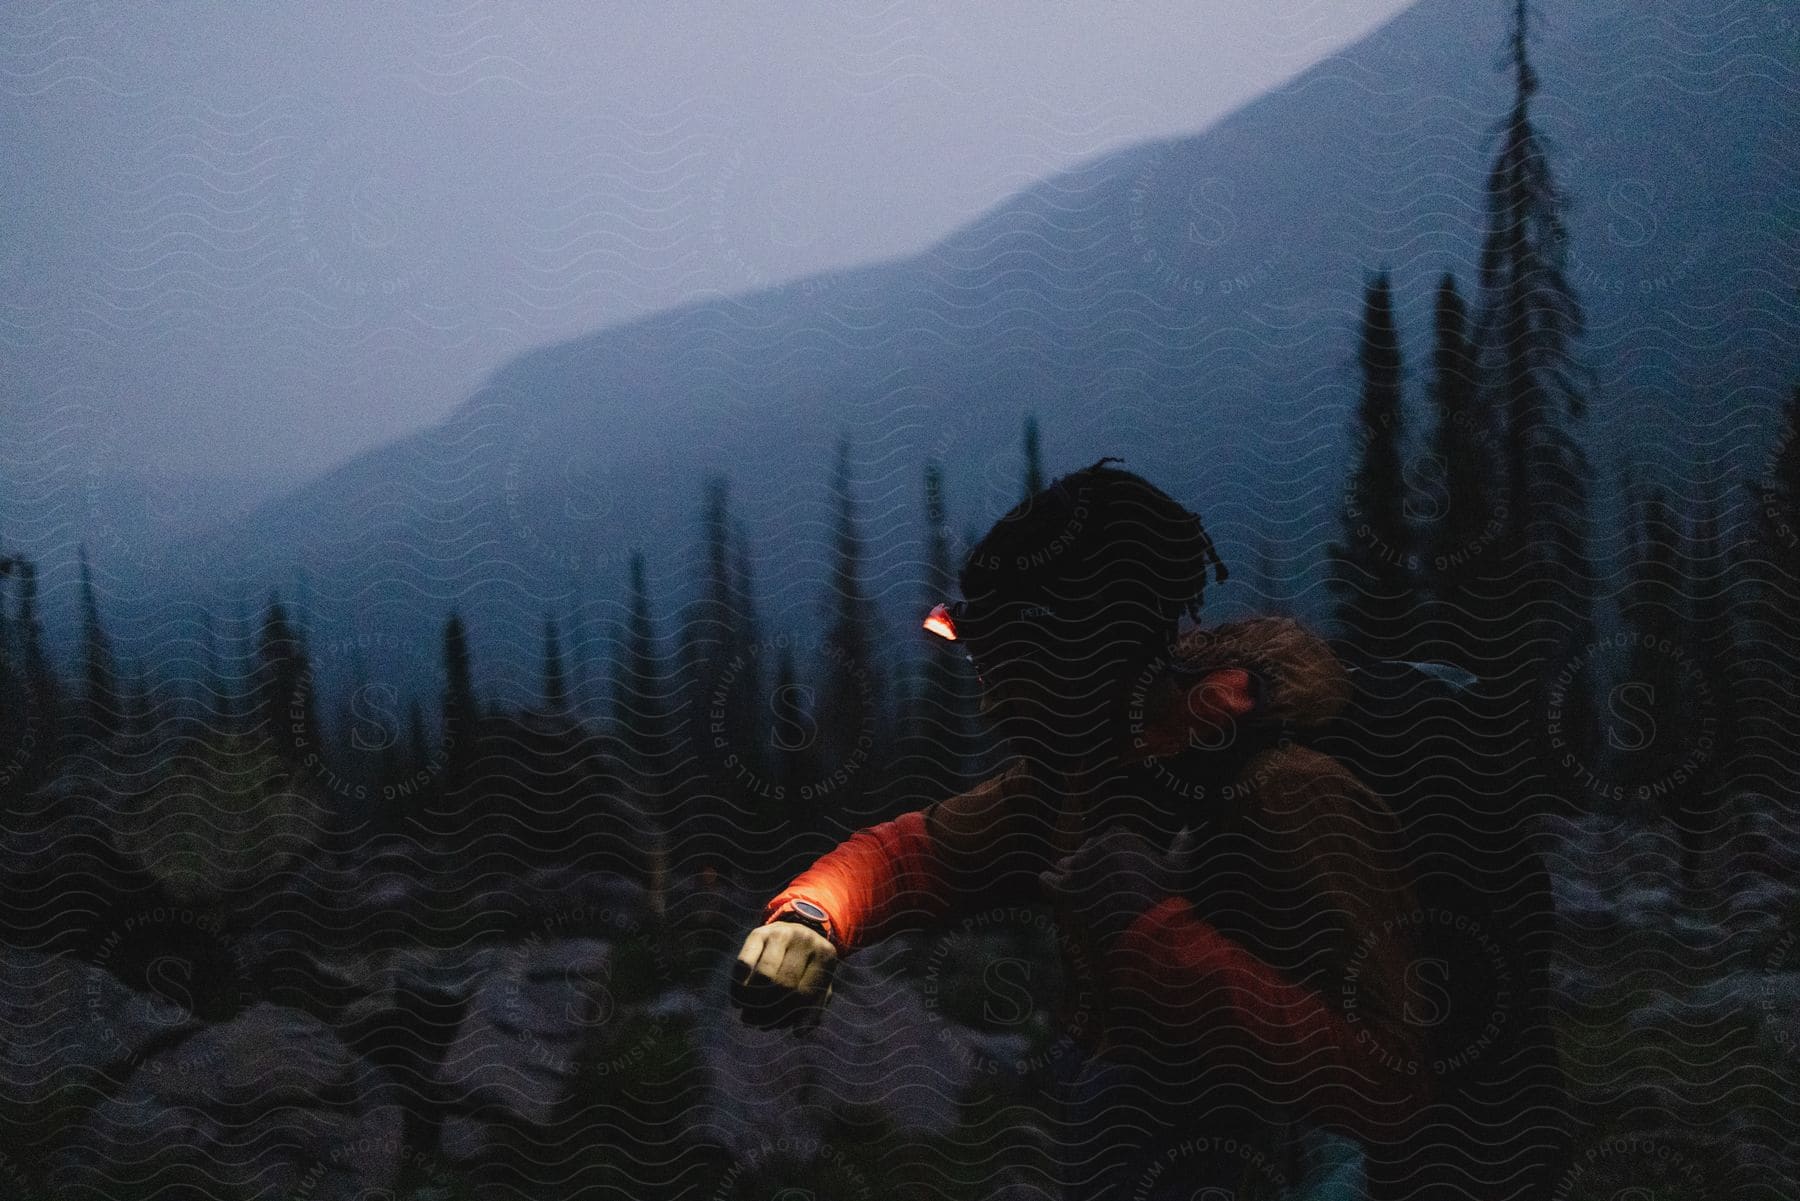 A hiker checks his light up wristwatch on a rocky mountain path at night